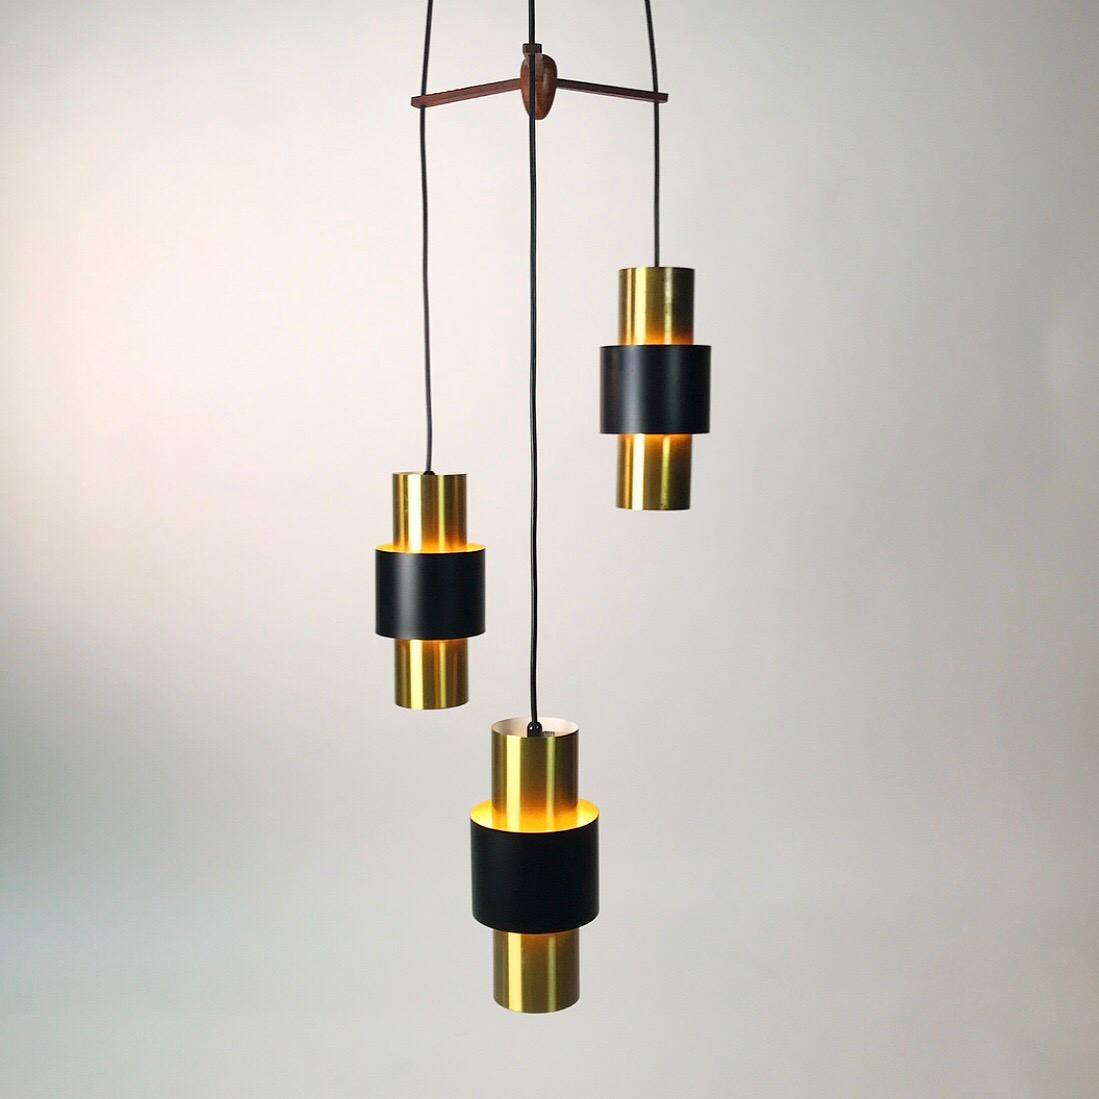 Beautiful classic brass ceiling light Etna by Jo Hammerborg for Fog and Morup, Denmark 1966.

Brass light with a centrepiece of black lacquer and a wooden suspension. 

Good vintage condition with some patina to the surface of one of the lights.